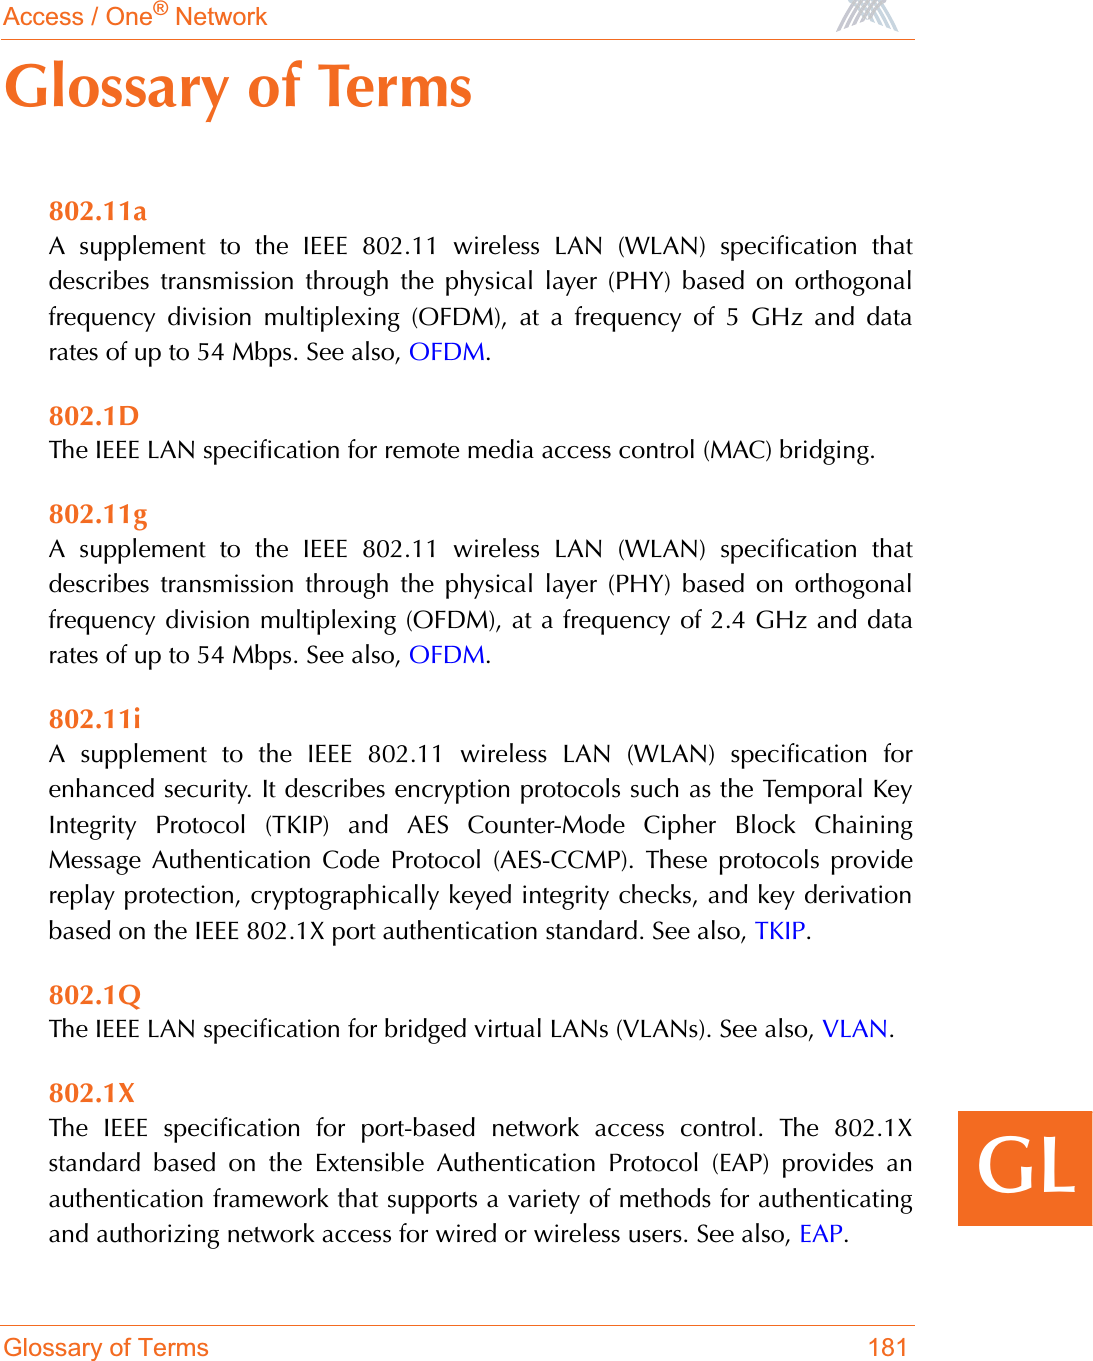 Access / One® NetworkGlossary of Terms 181GLGlossary of Terms802.11aA supplement to the IEEE 802.11 wireless LAN (WLAN) specification thatdescribes transmission through the physical layer (PHY) based on orthogonalfrequency division multiplexing (OFDM), at a frequency of 5 GHz and datarates of up to 54 Mbps. See also, OFDM.802.1DThe IEEE LAN specification for remote media access control (MAC) bridging.802.11gA supplement to the IEEE 802.11 wireless LAN (WLAN) specification thatdescribes transmission through the physical layer (PHY) based on orthogonalfrequency division multiplexing (OFDM), at a frequency of 2.4 GHz and datarates of up to 54 Mbps. See also, OFDM.802.11iA supplement to the IEEE 802.11 wireless LAN (WLAN) specification forenhanced security. It describes encryption protocols such as the Temporal KeyIntegrity Protocol (TKIP) and AES Counter-Mode Cipher Block ChainingMessage Authentication Code Protocol (AES-CCMP). These protocols providereplay protection, cryptographically keyed integrity checks, and key derivationbased on the IEEE 802.1X port authentication standard. See also, TKIP.802.1QThe IEEE LAN specification for bridged virtual LANs (VLANs). See also, VLAN.802.1XThe IEEE specification for port-based network access control. The 802.1Xstandard based on the Extensible Authentication Protocol (EAP) provides anauthentication framework that supports a variety of methods for authenticatingand authorizing network access for wired or wireless users. See also, EAP.